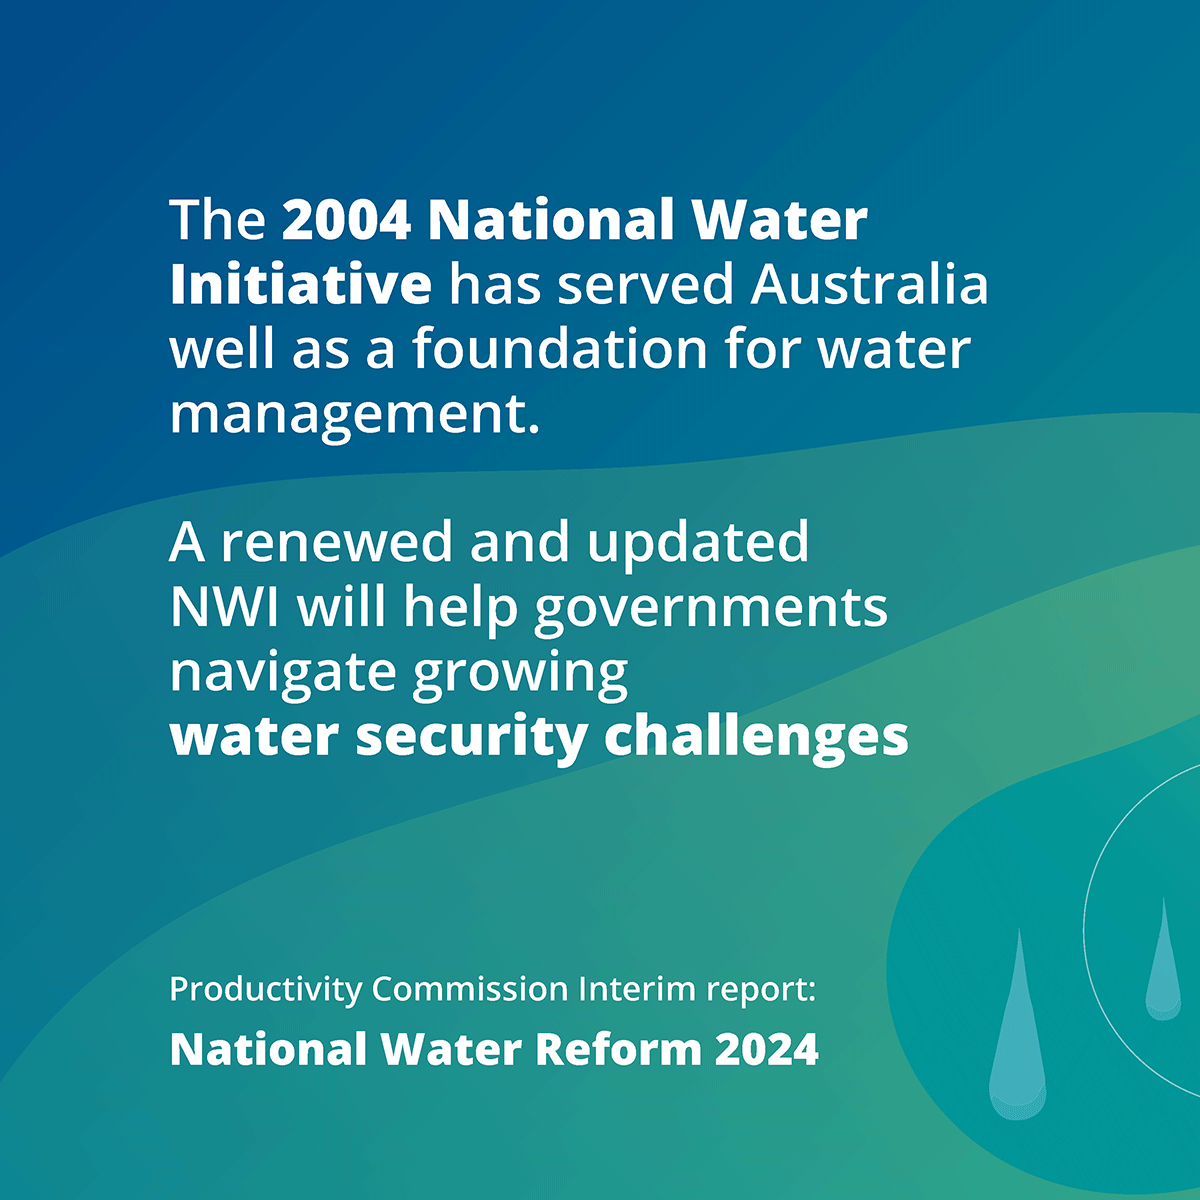 The 2004 National Water Initiative has served Australia well as a foundation for water management. A renewed and updated NWI will help governments navigate growing
water security challenges. Productivity Commission Interim report: National Water Reform 2024